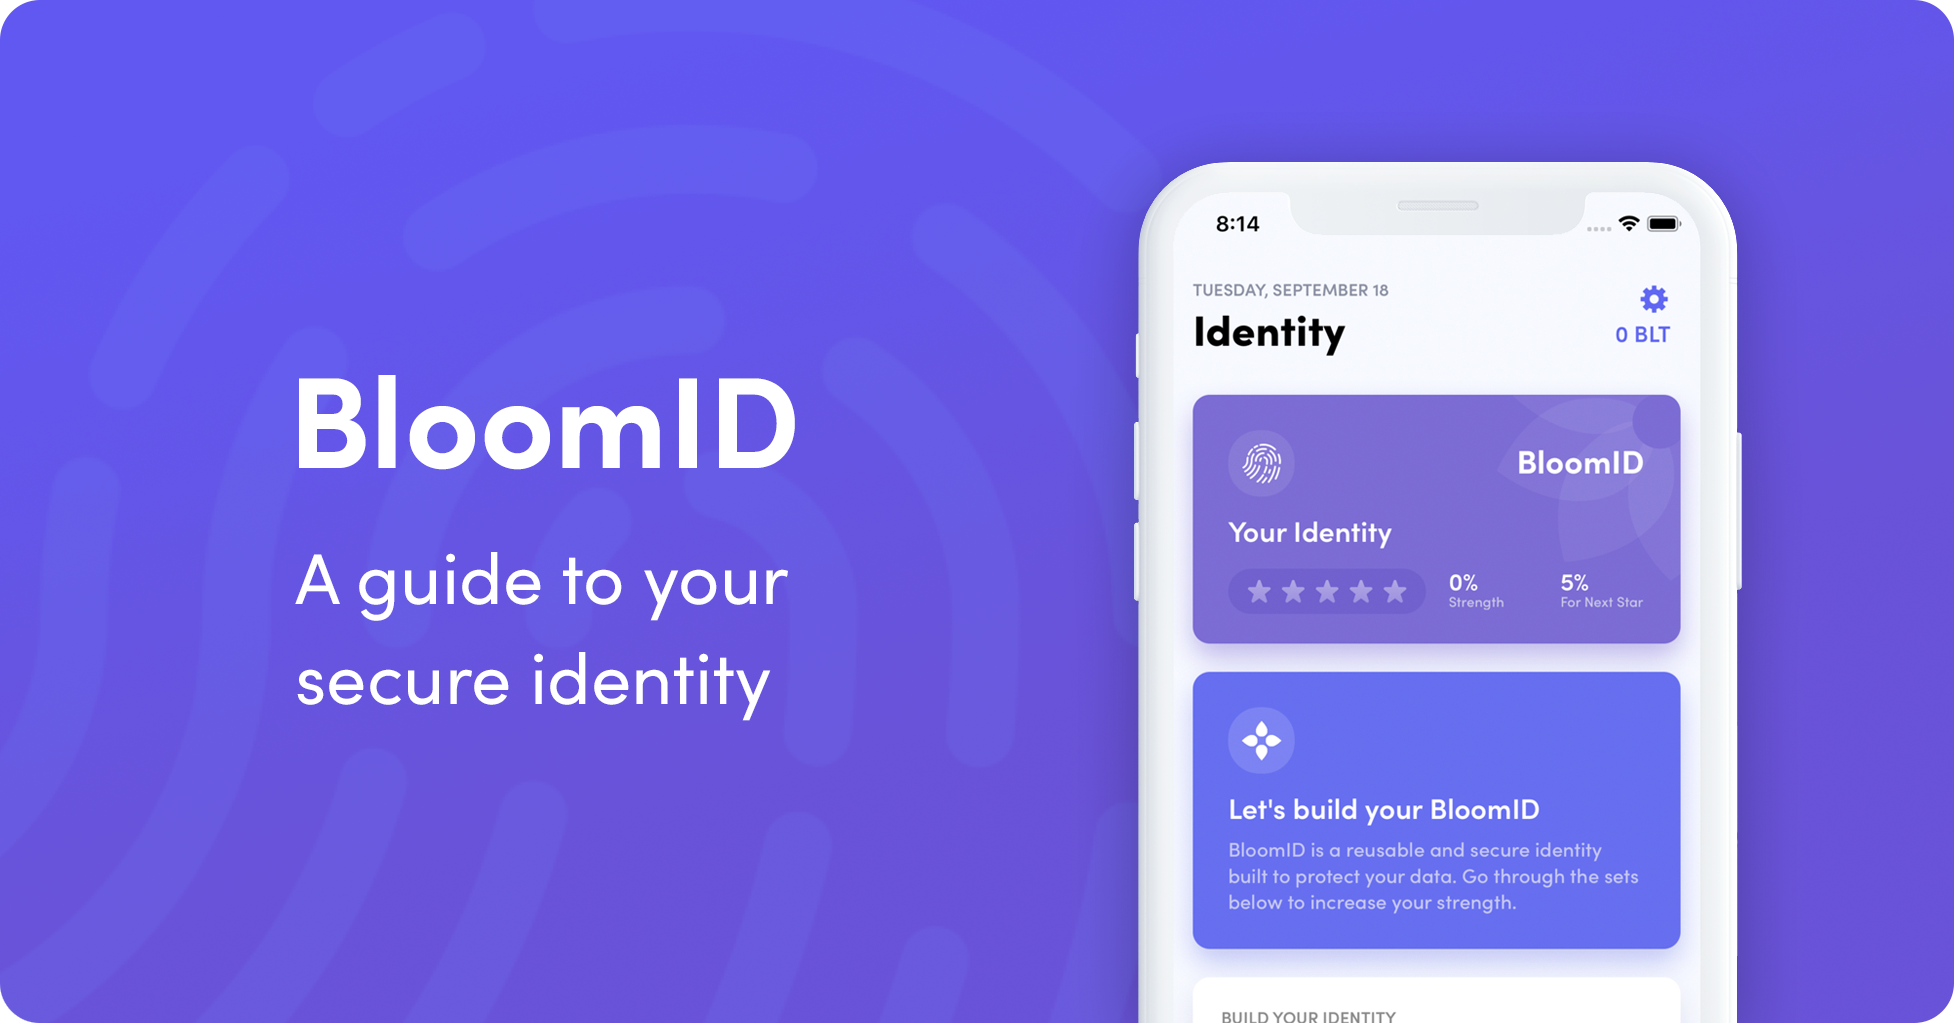 Bloomid: A Guide To Your Secure Identity